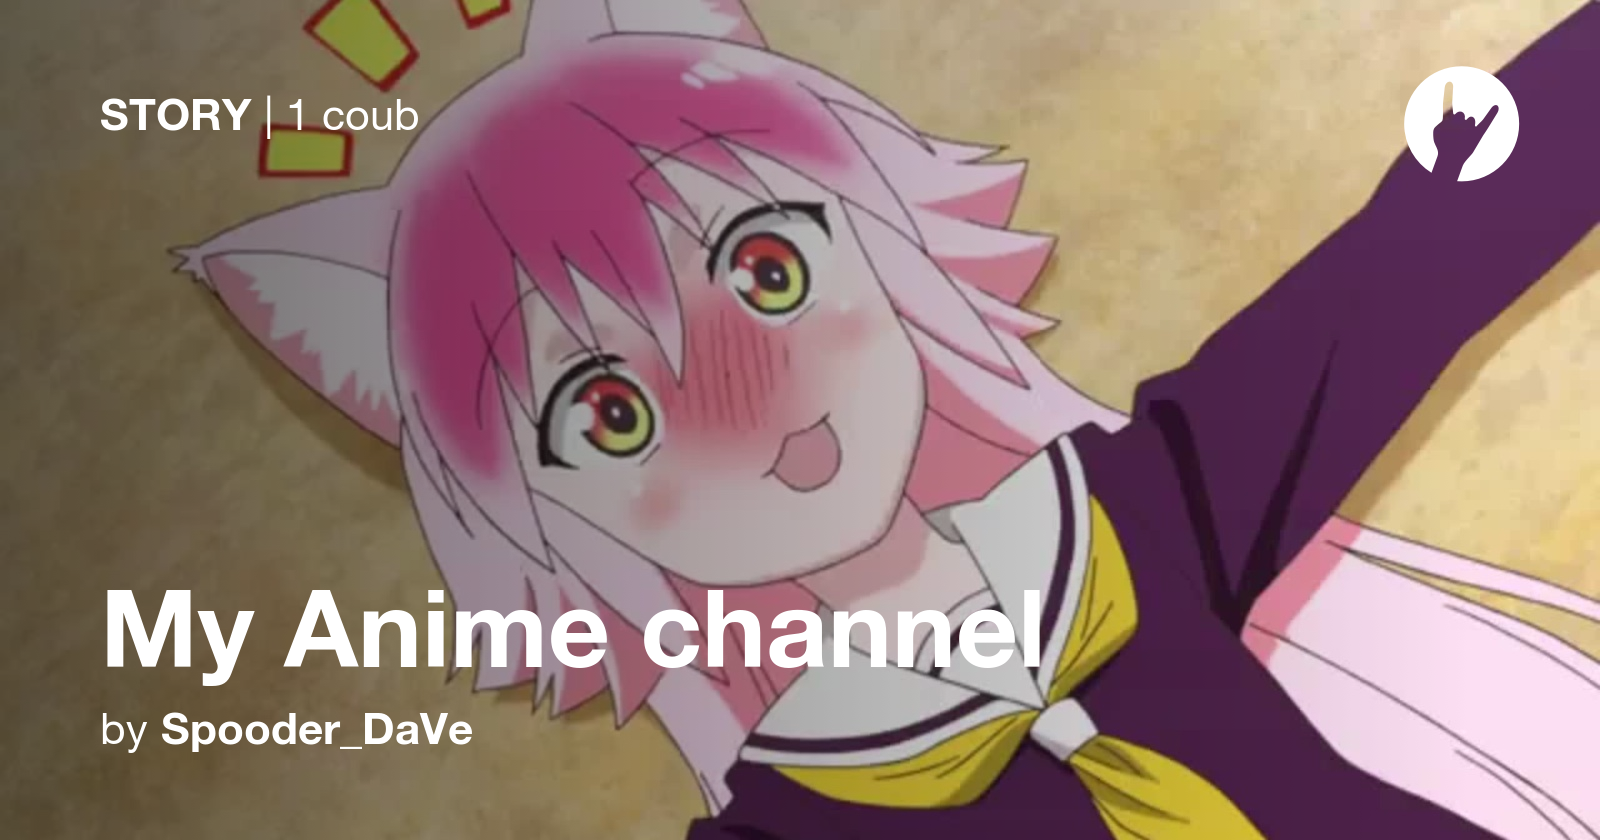 Your Anime Channel